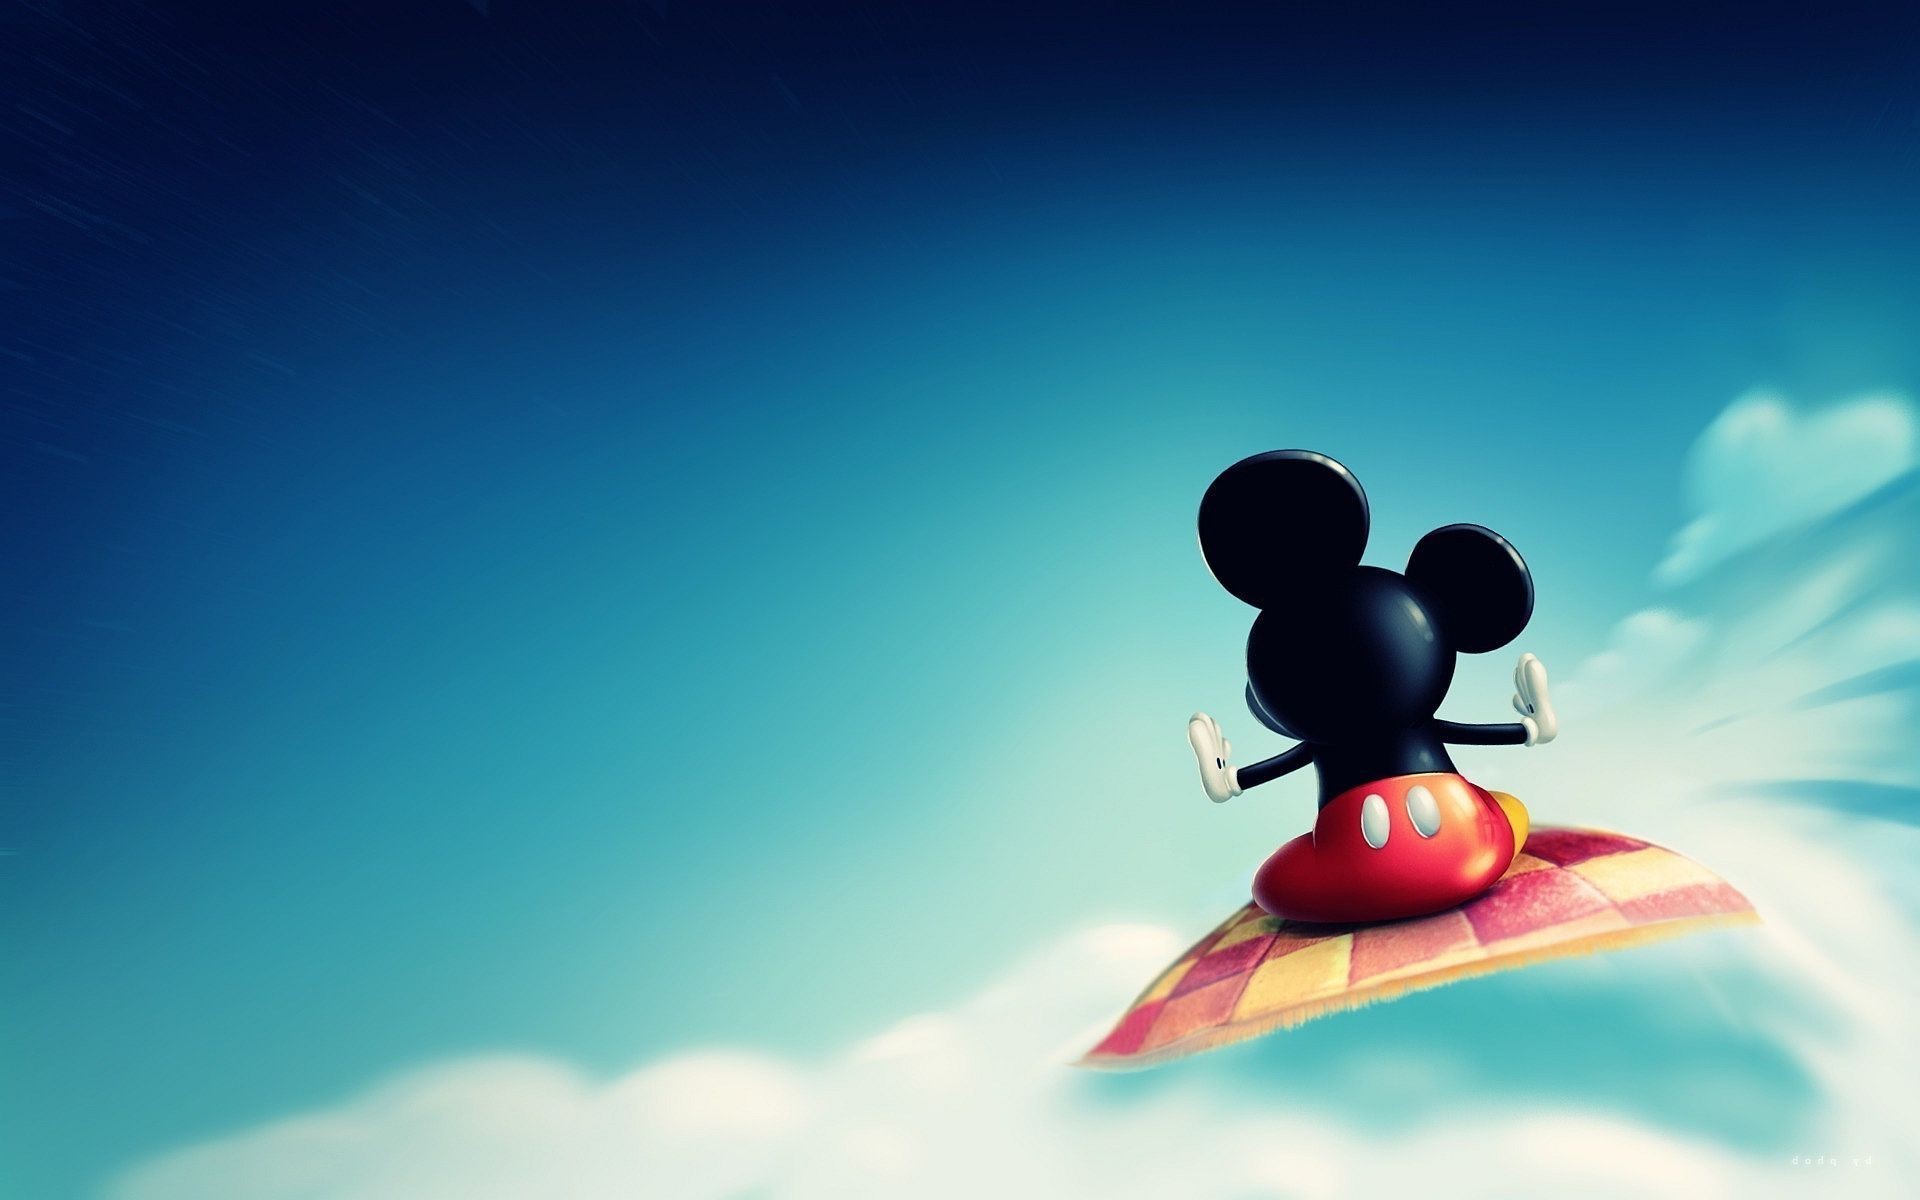 1920x1200 Hd Background Mickey Mouse And Minnie Mouse Love Couple Heart 1900 1200 Mickey Mouse Wallpapers 1920x1200